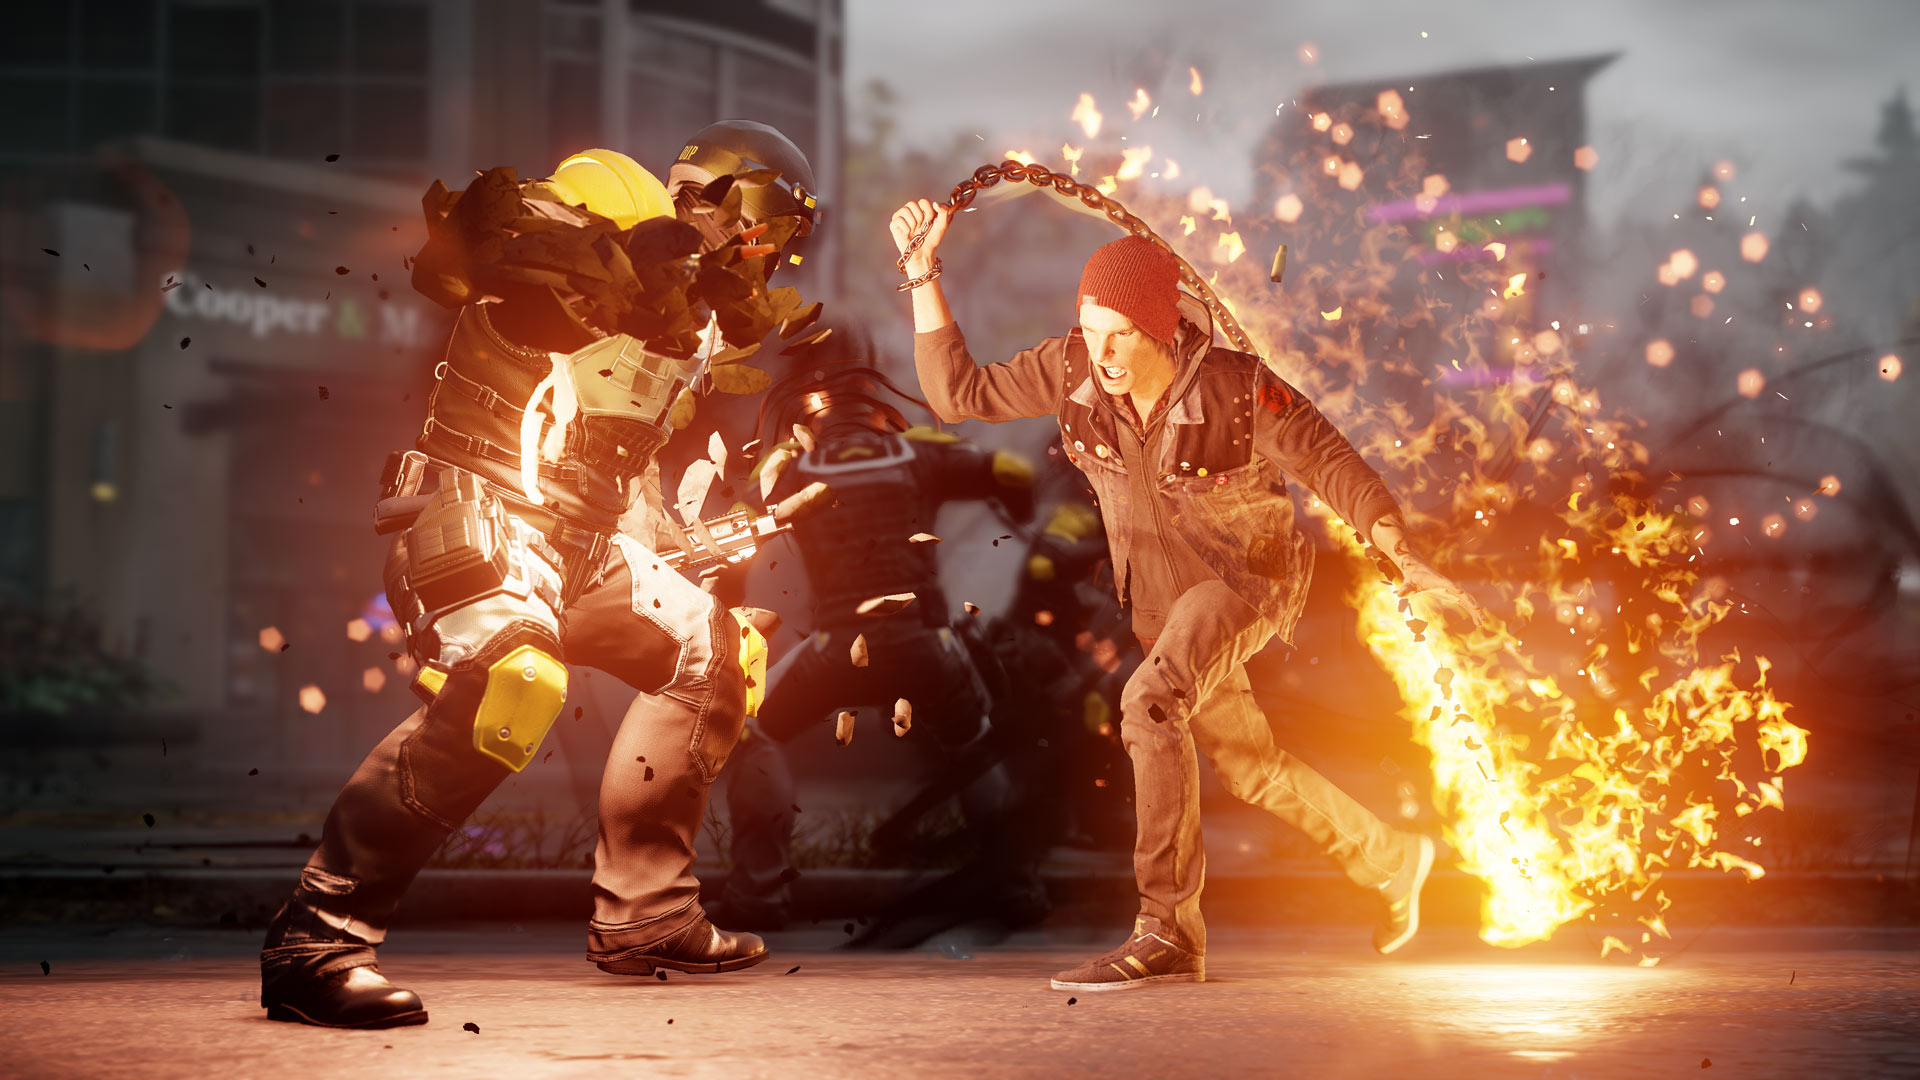 inFamous: Second Son (PS4)